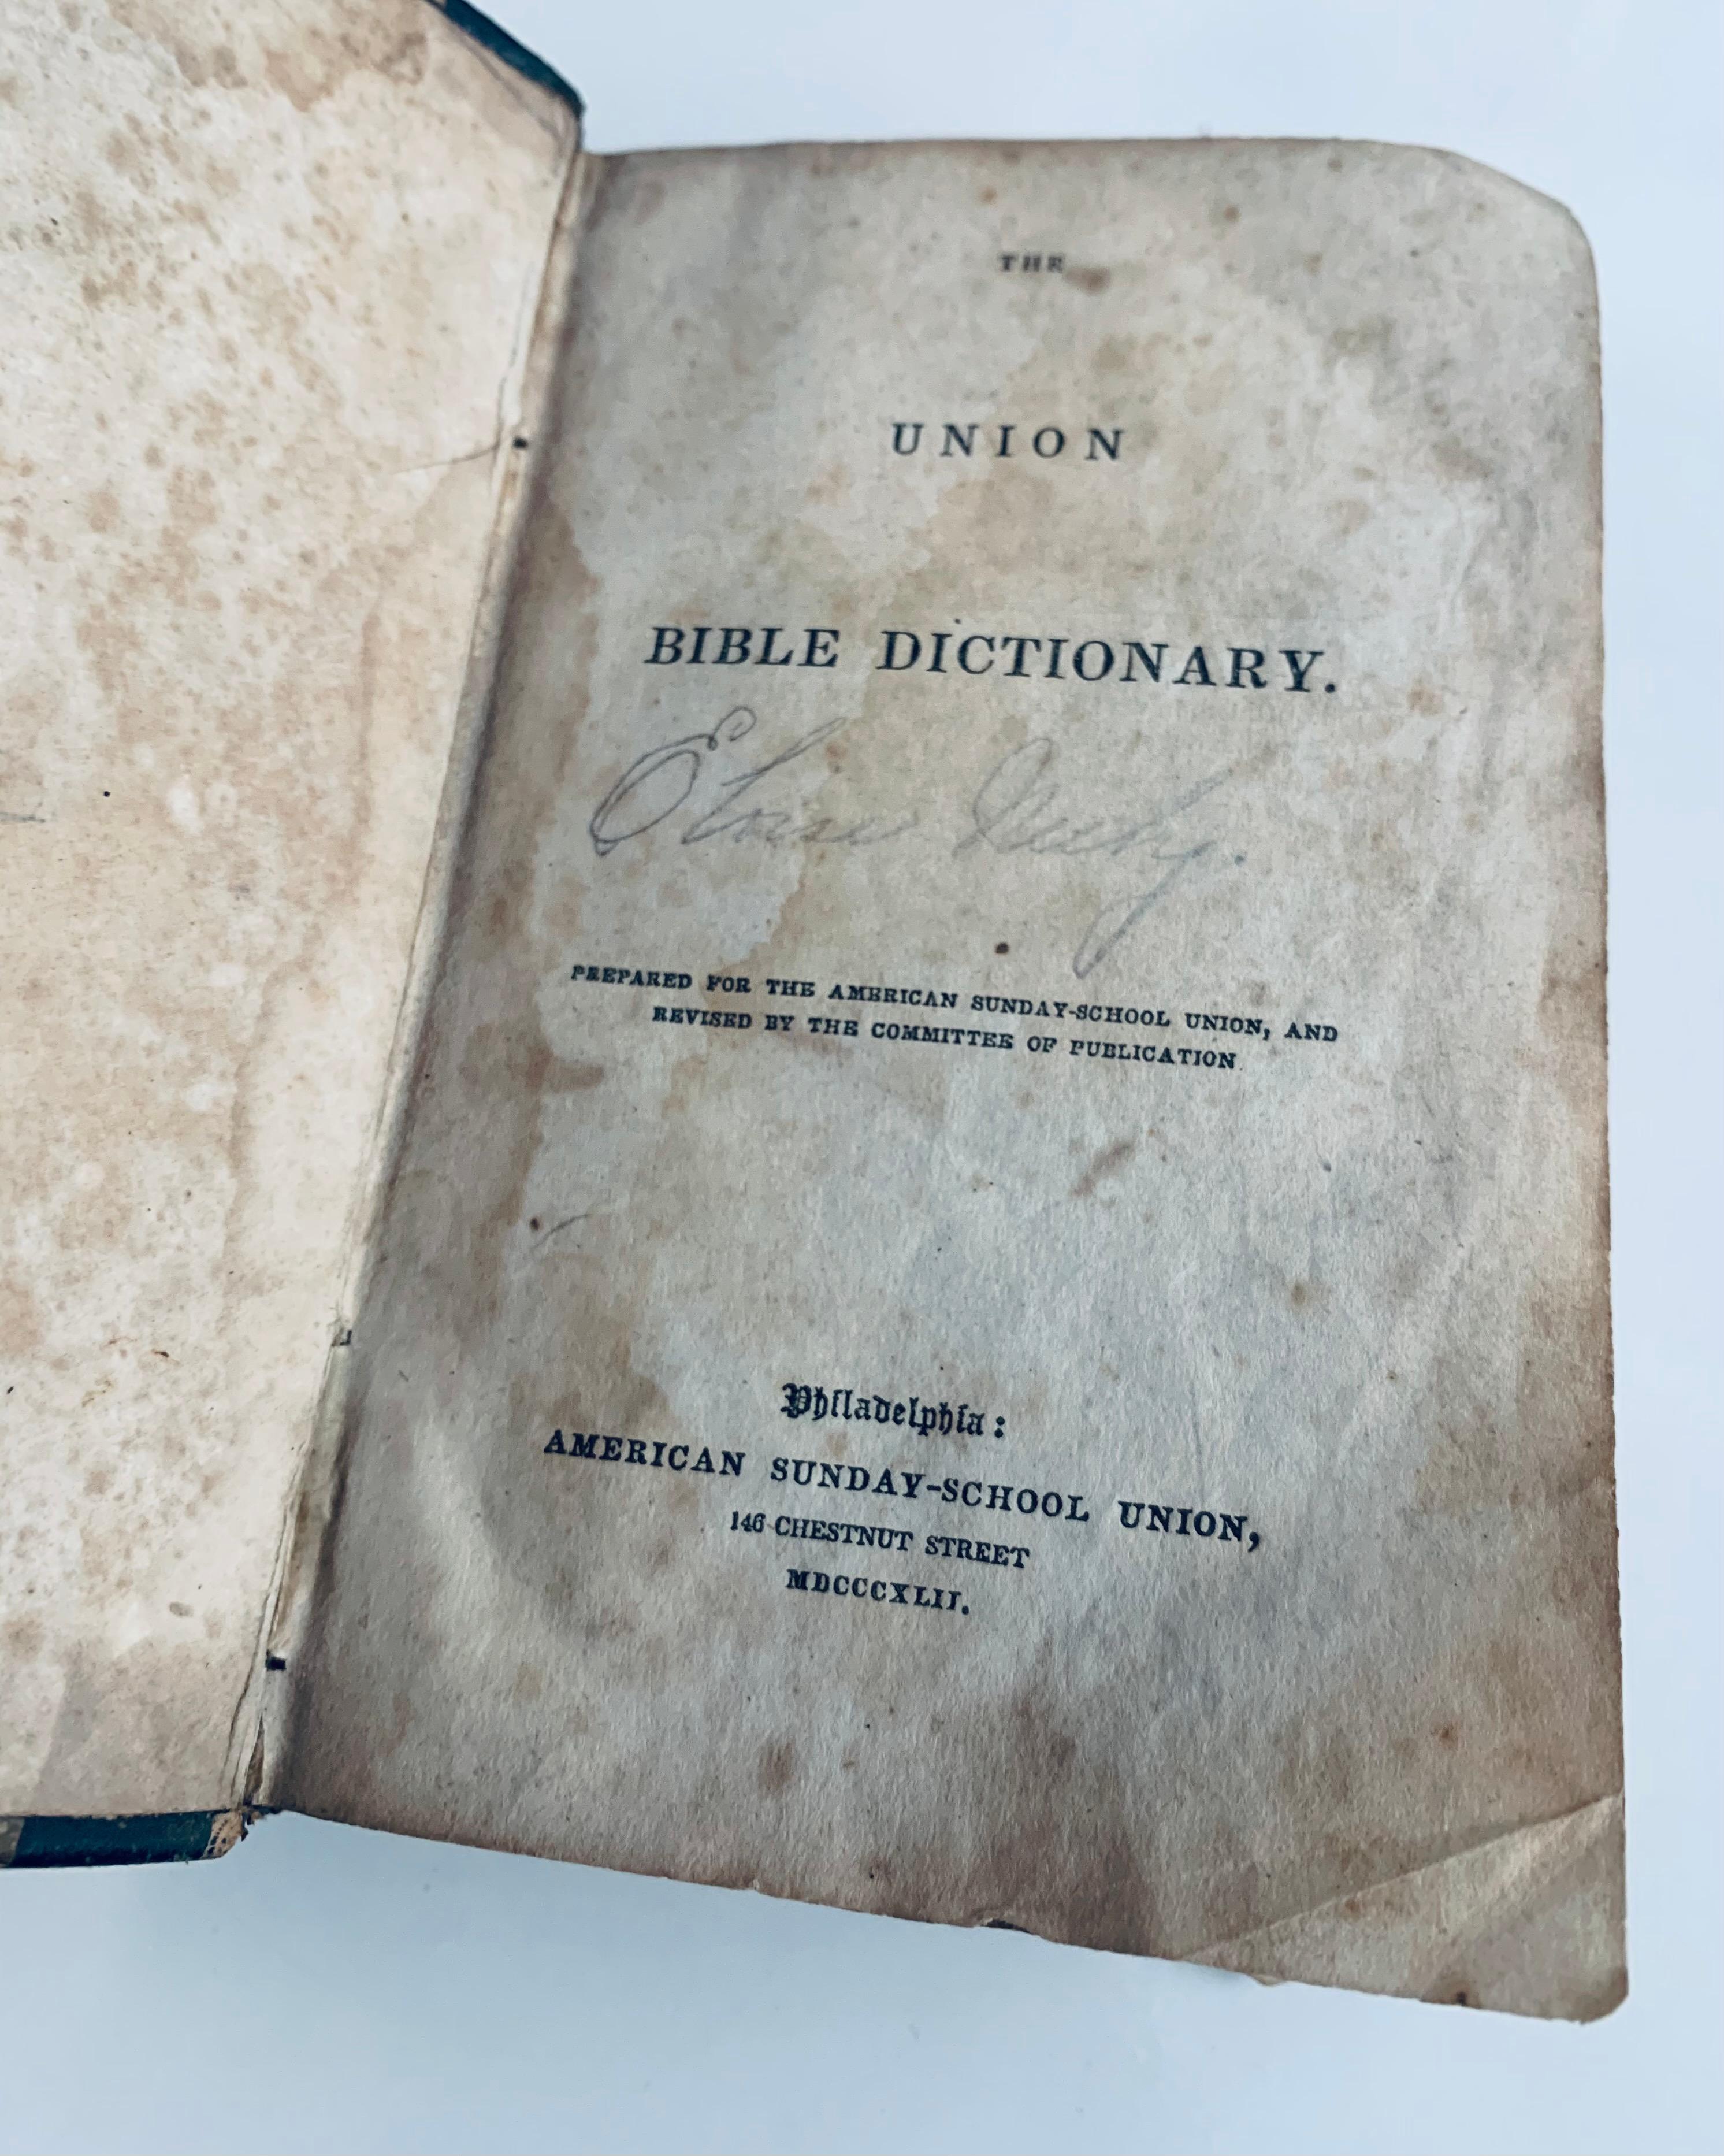 The Union Bible Dictionary (1842)